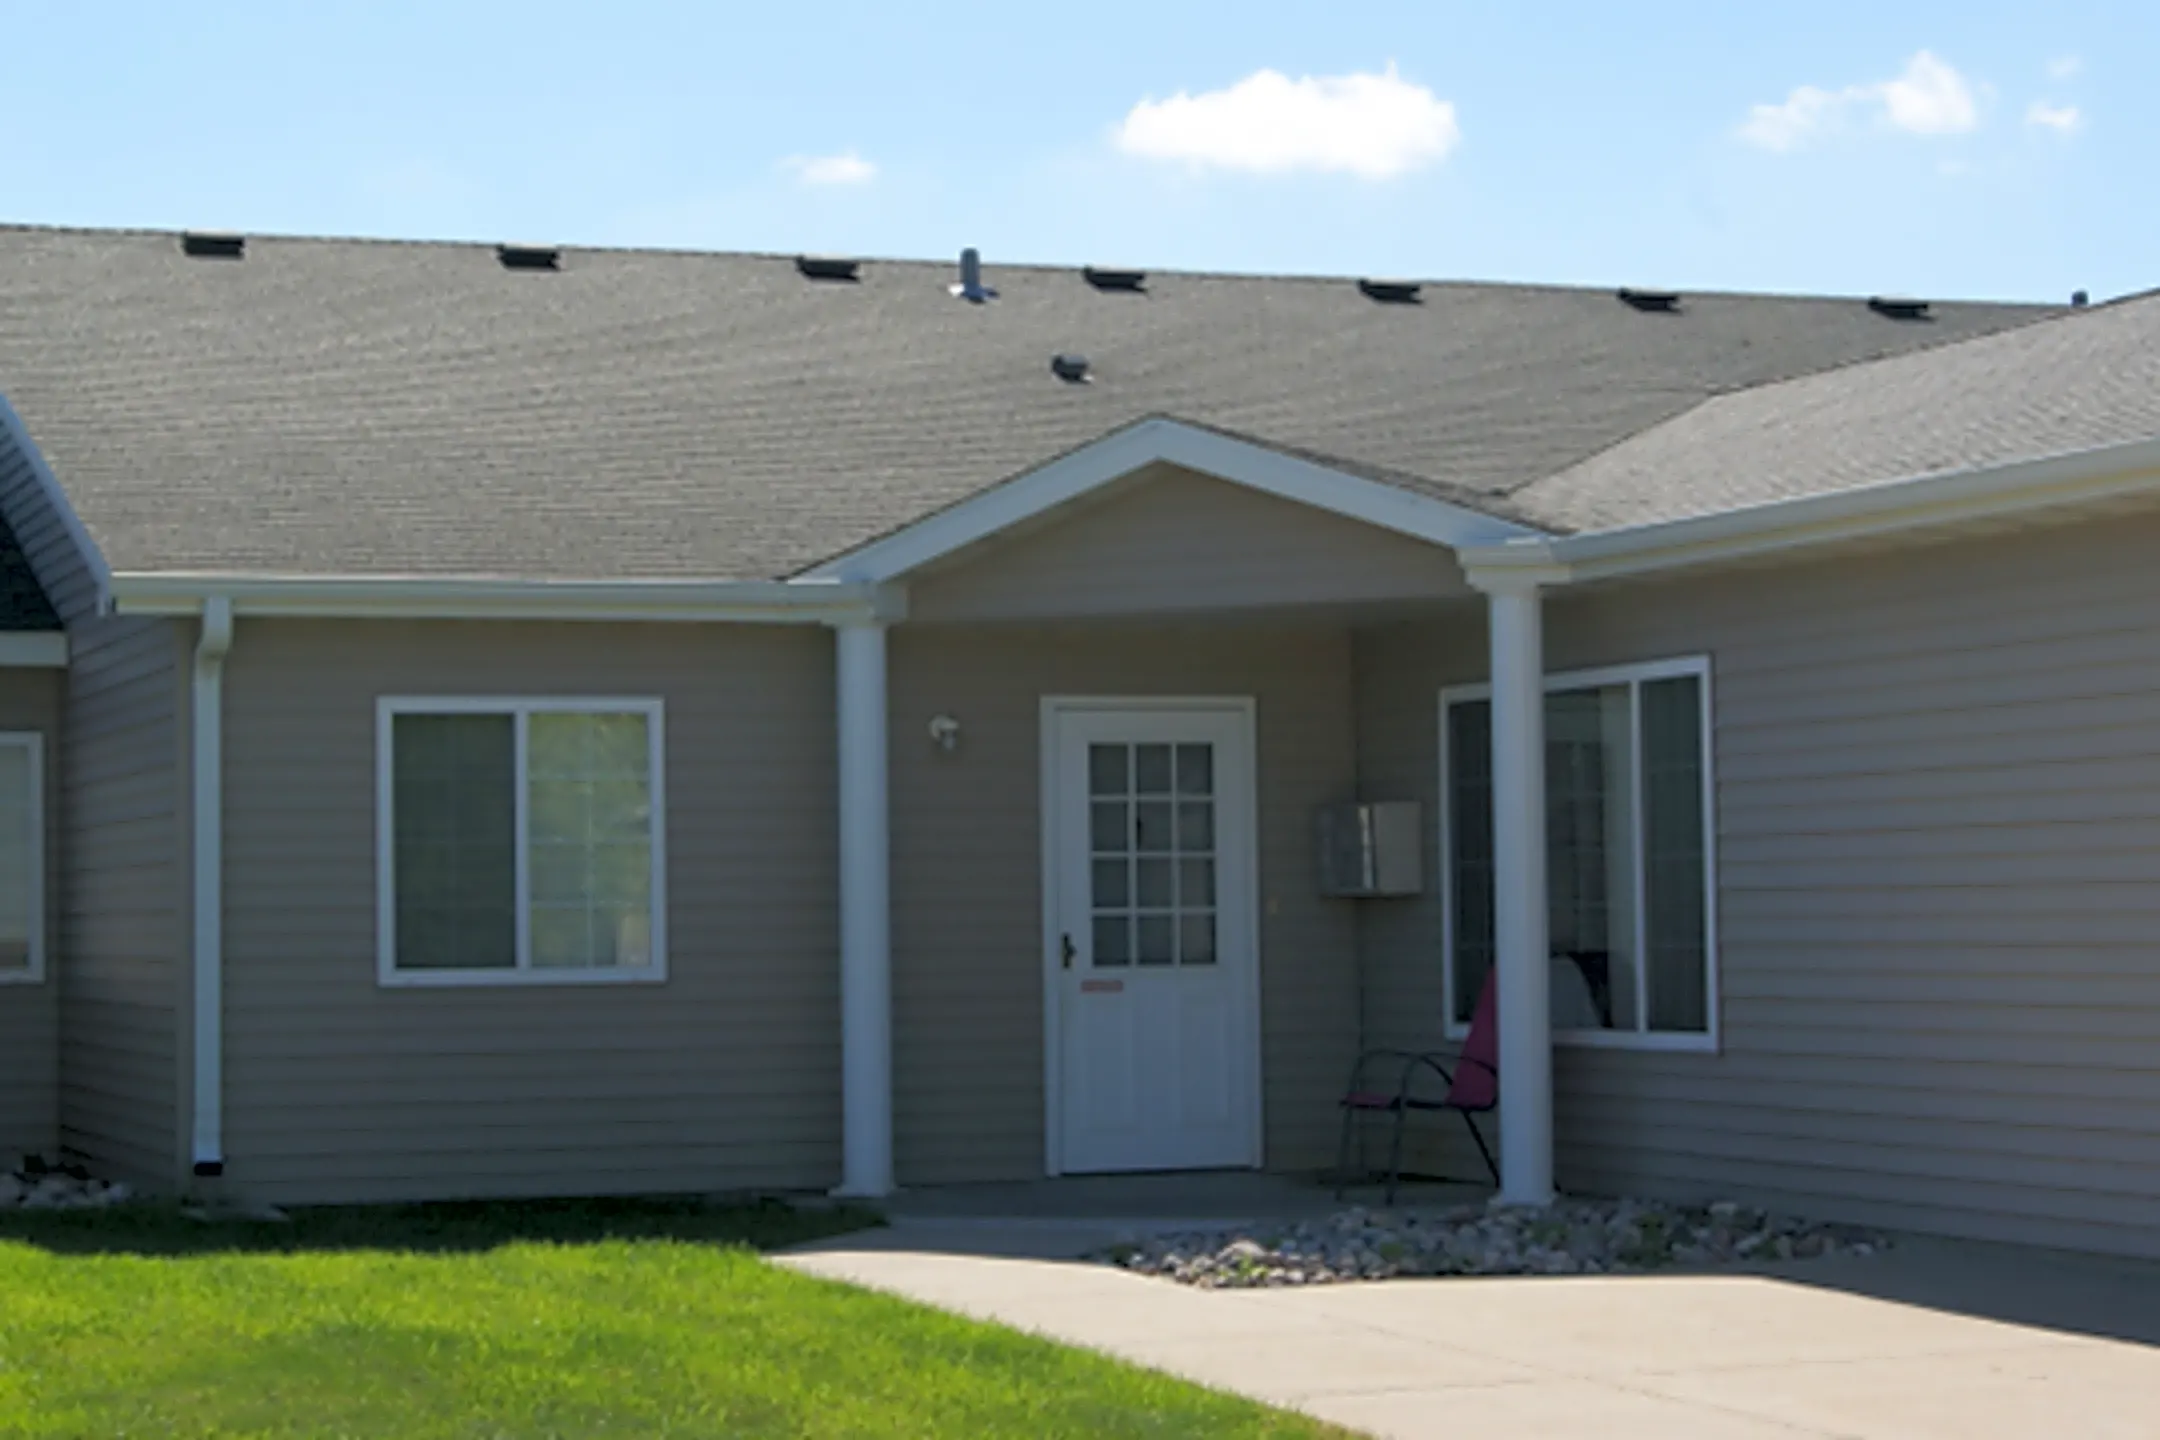 Building - Rattenborg Townhomes - West Fargo, ND